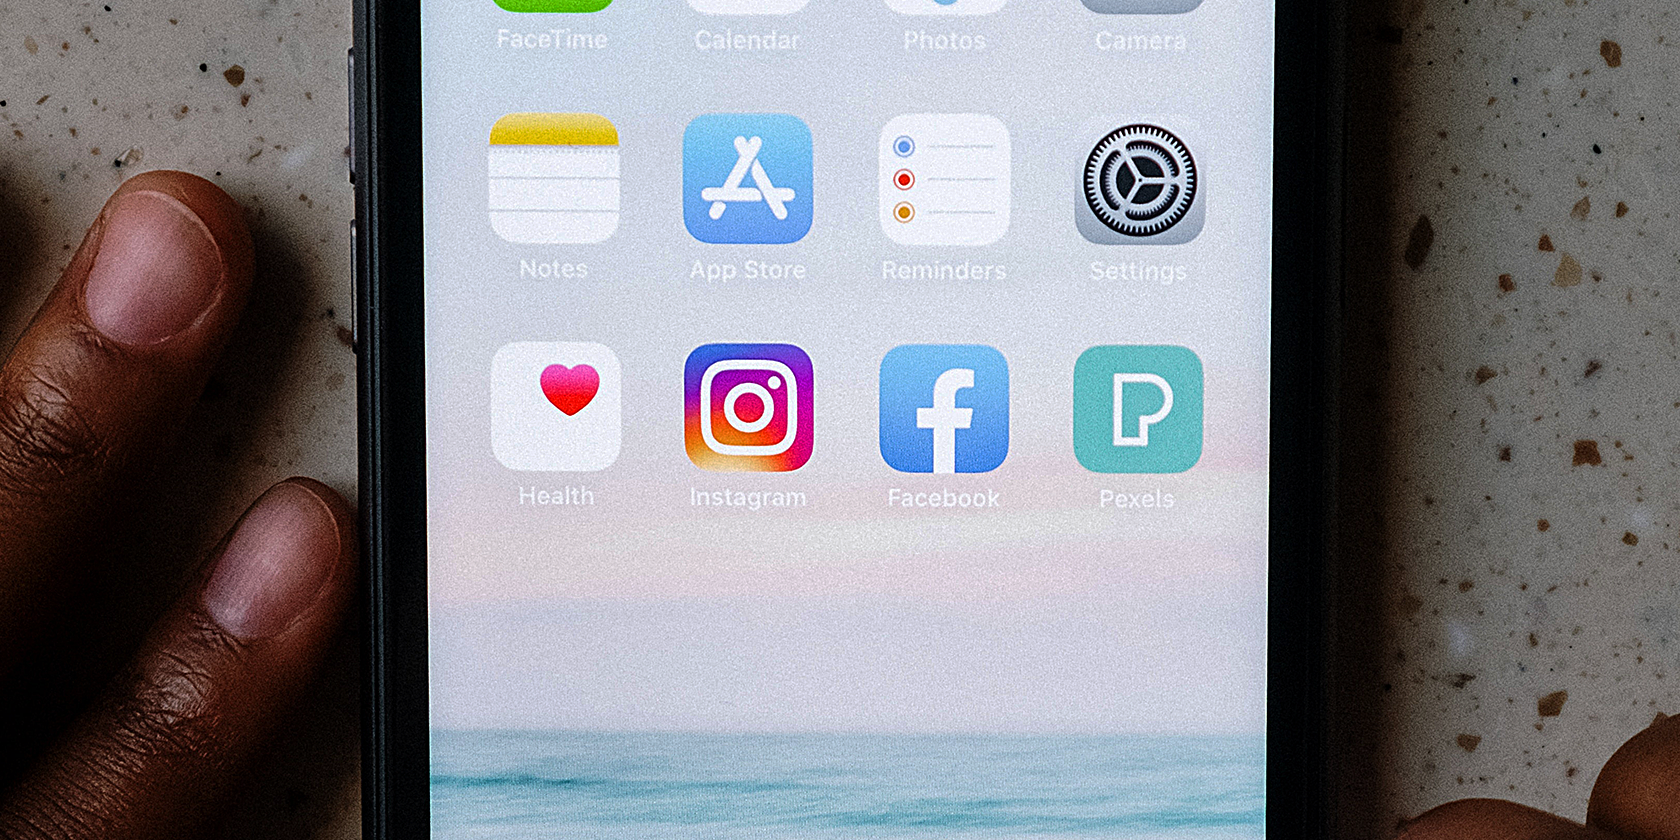 Mobile app icons for Instagram and Facebook